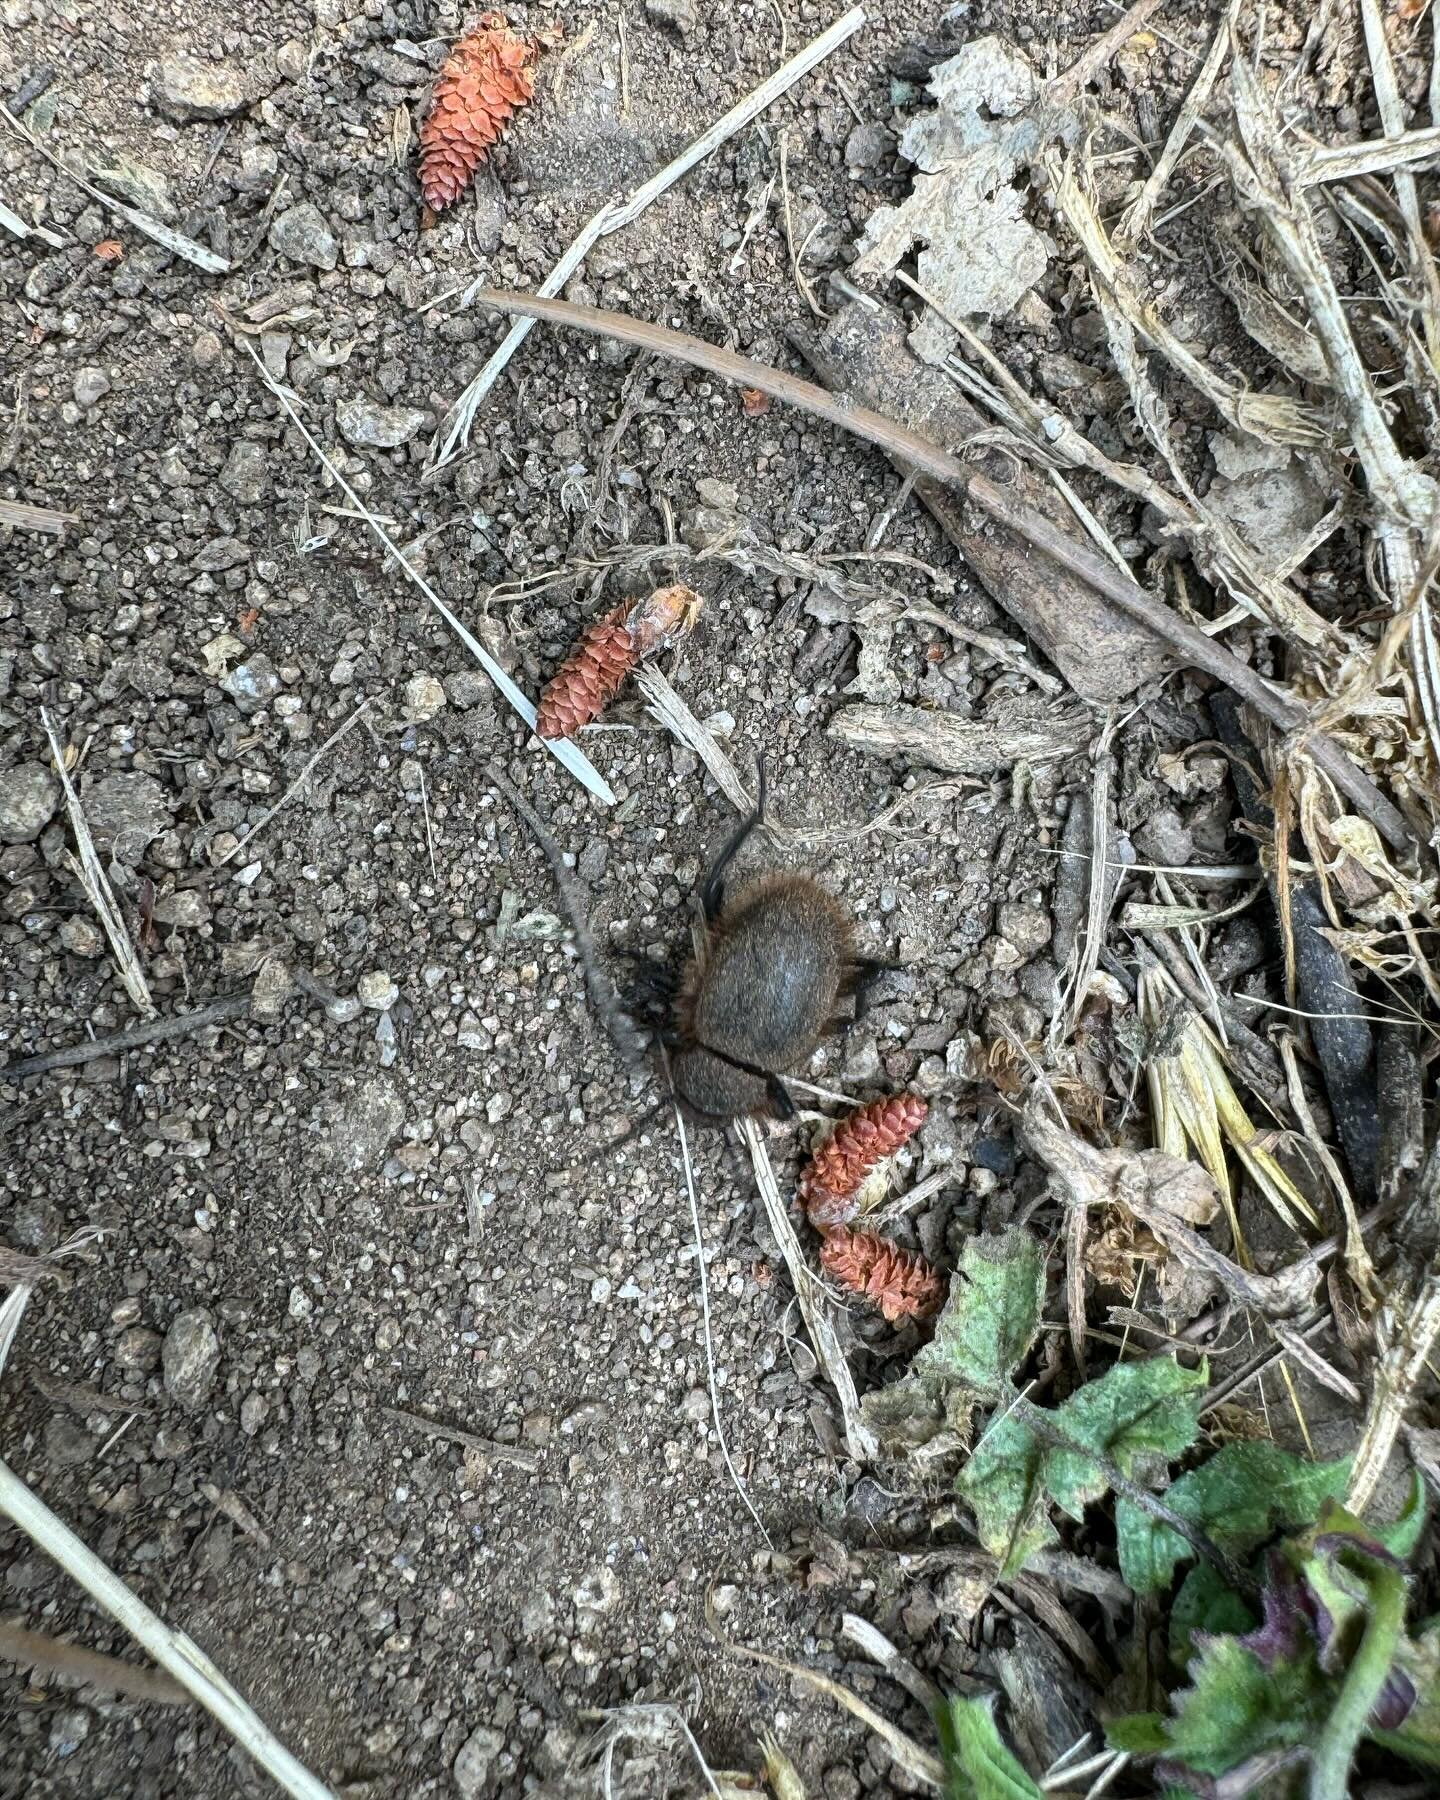 This fuzzy little dude is a Woolly Darkling Beetle. We come across them periodically in #griffithpark. It is a kind of stink beetle so stay clear if it raises its little rear end at you! 🦨